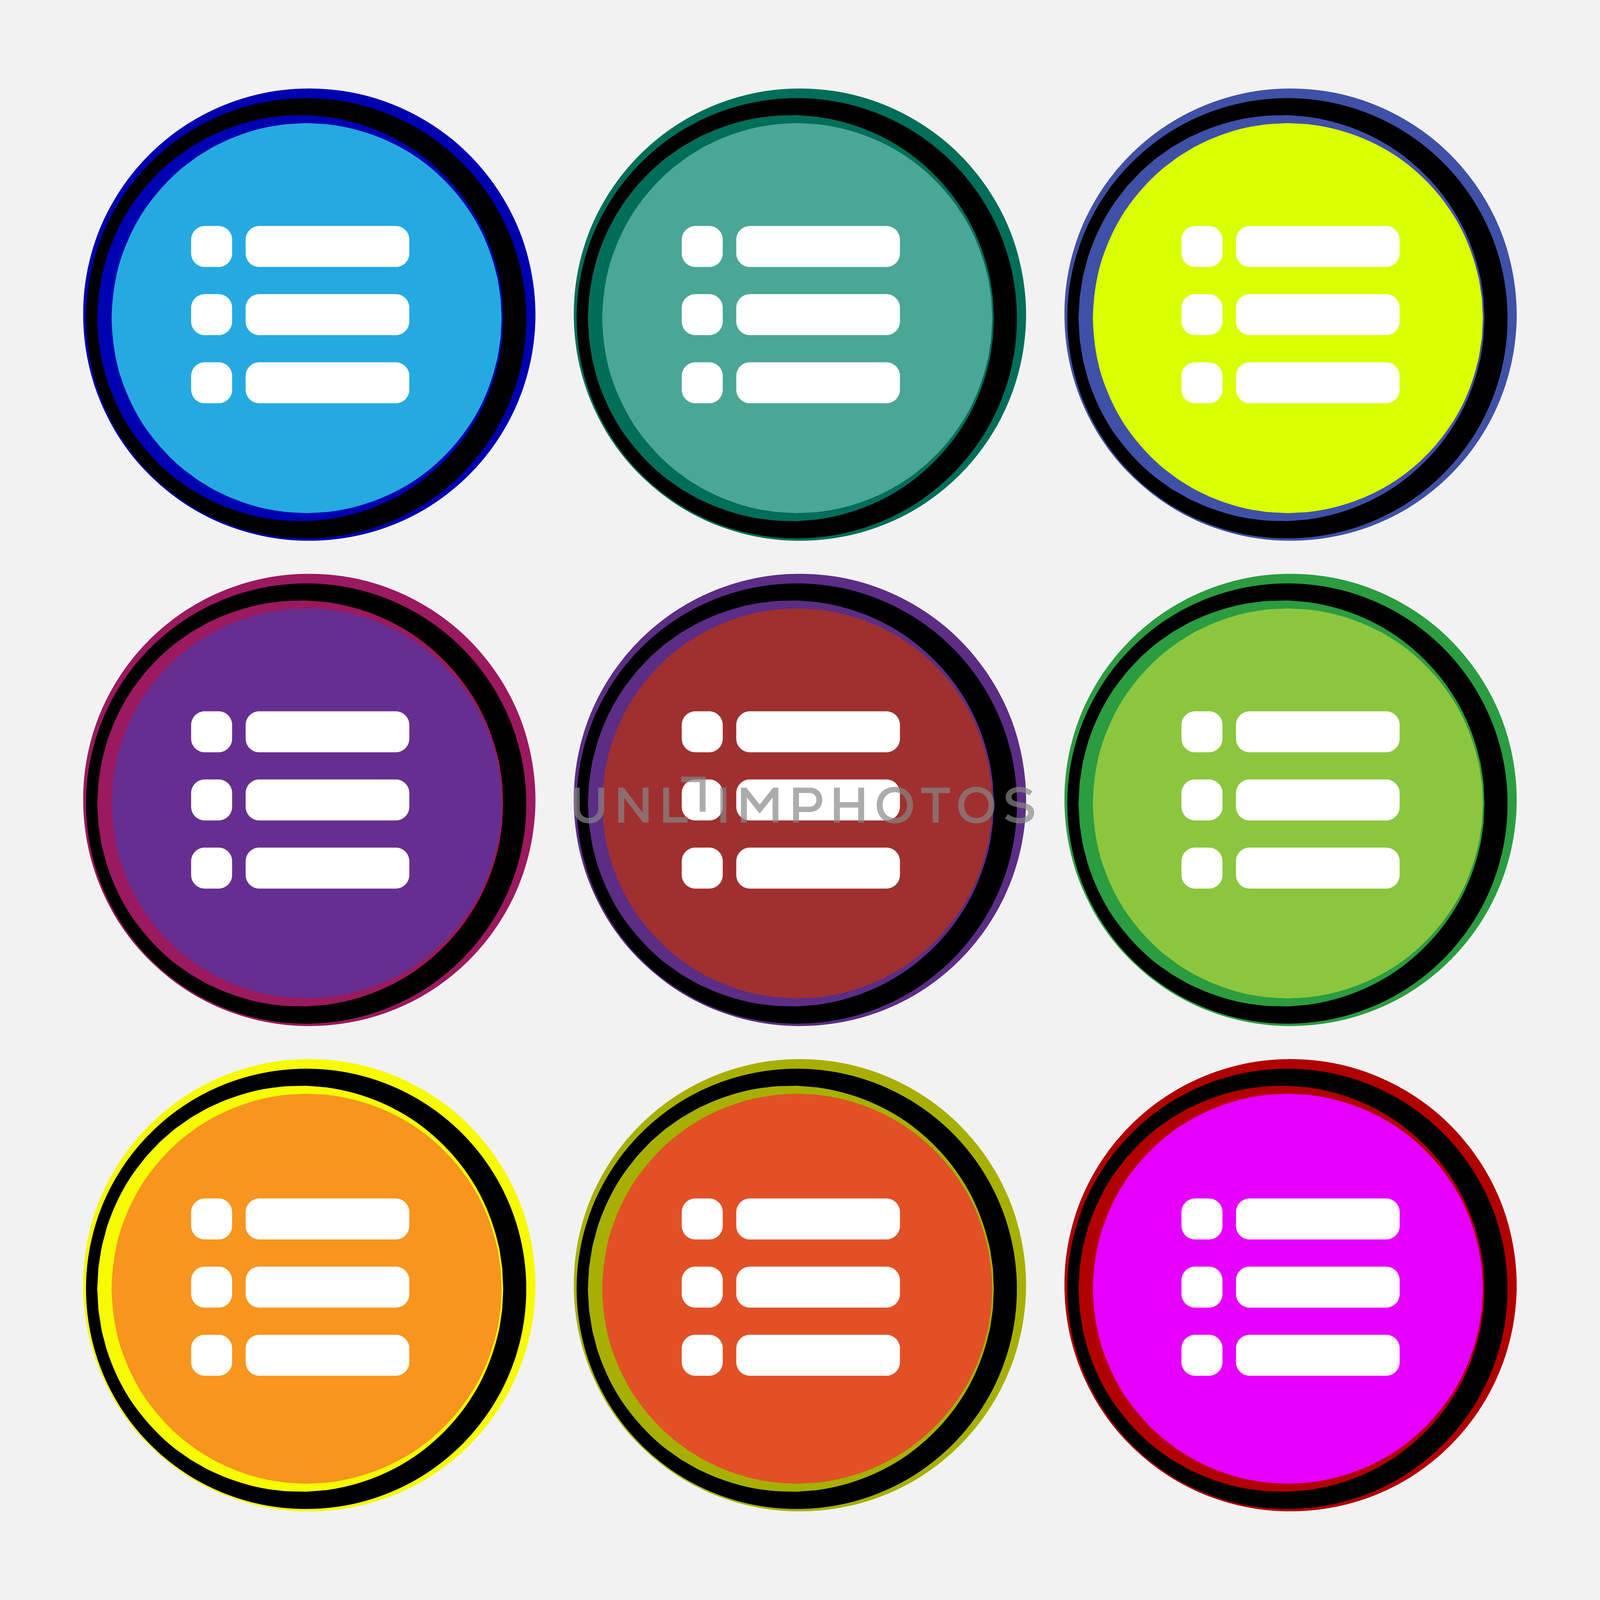 List menu, Content view options icon sign. Nine multi-colored round buttons. illustration